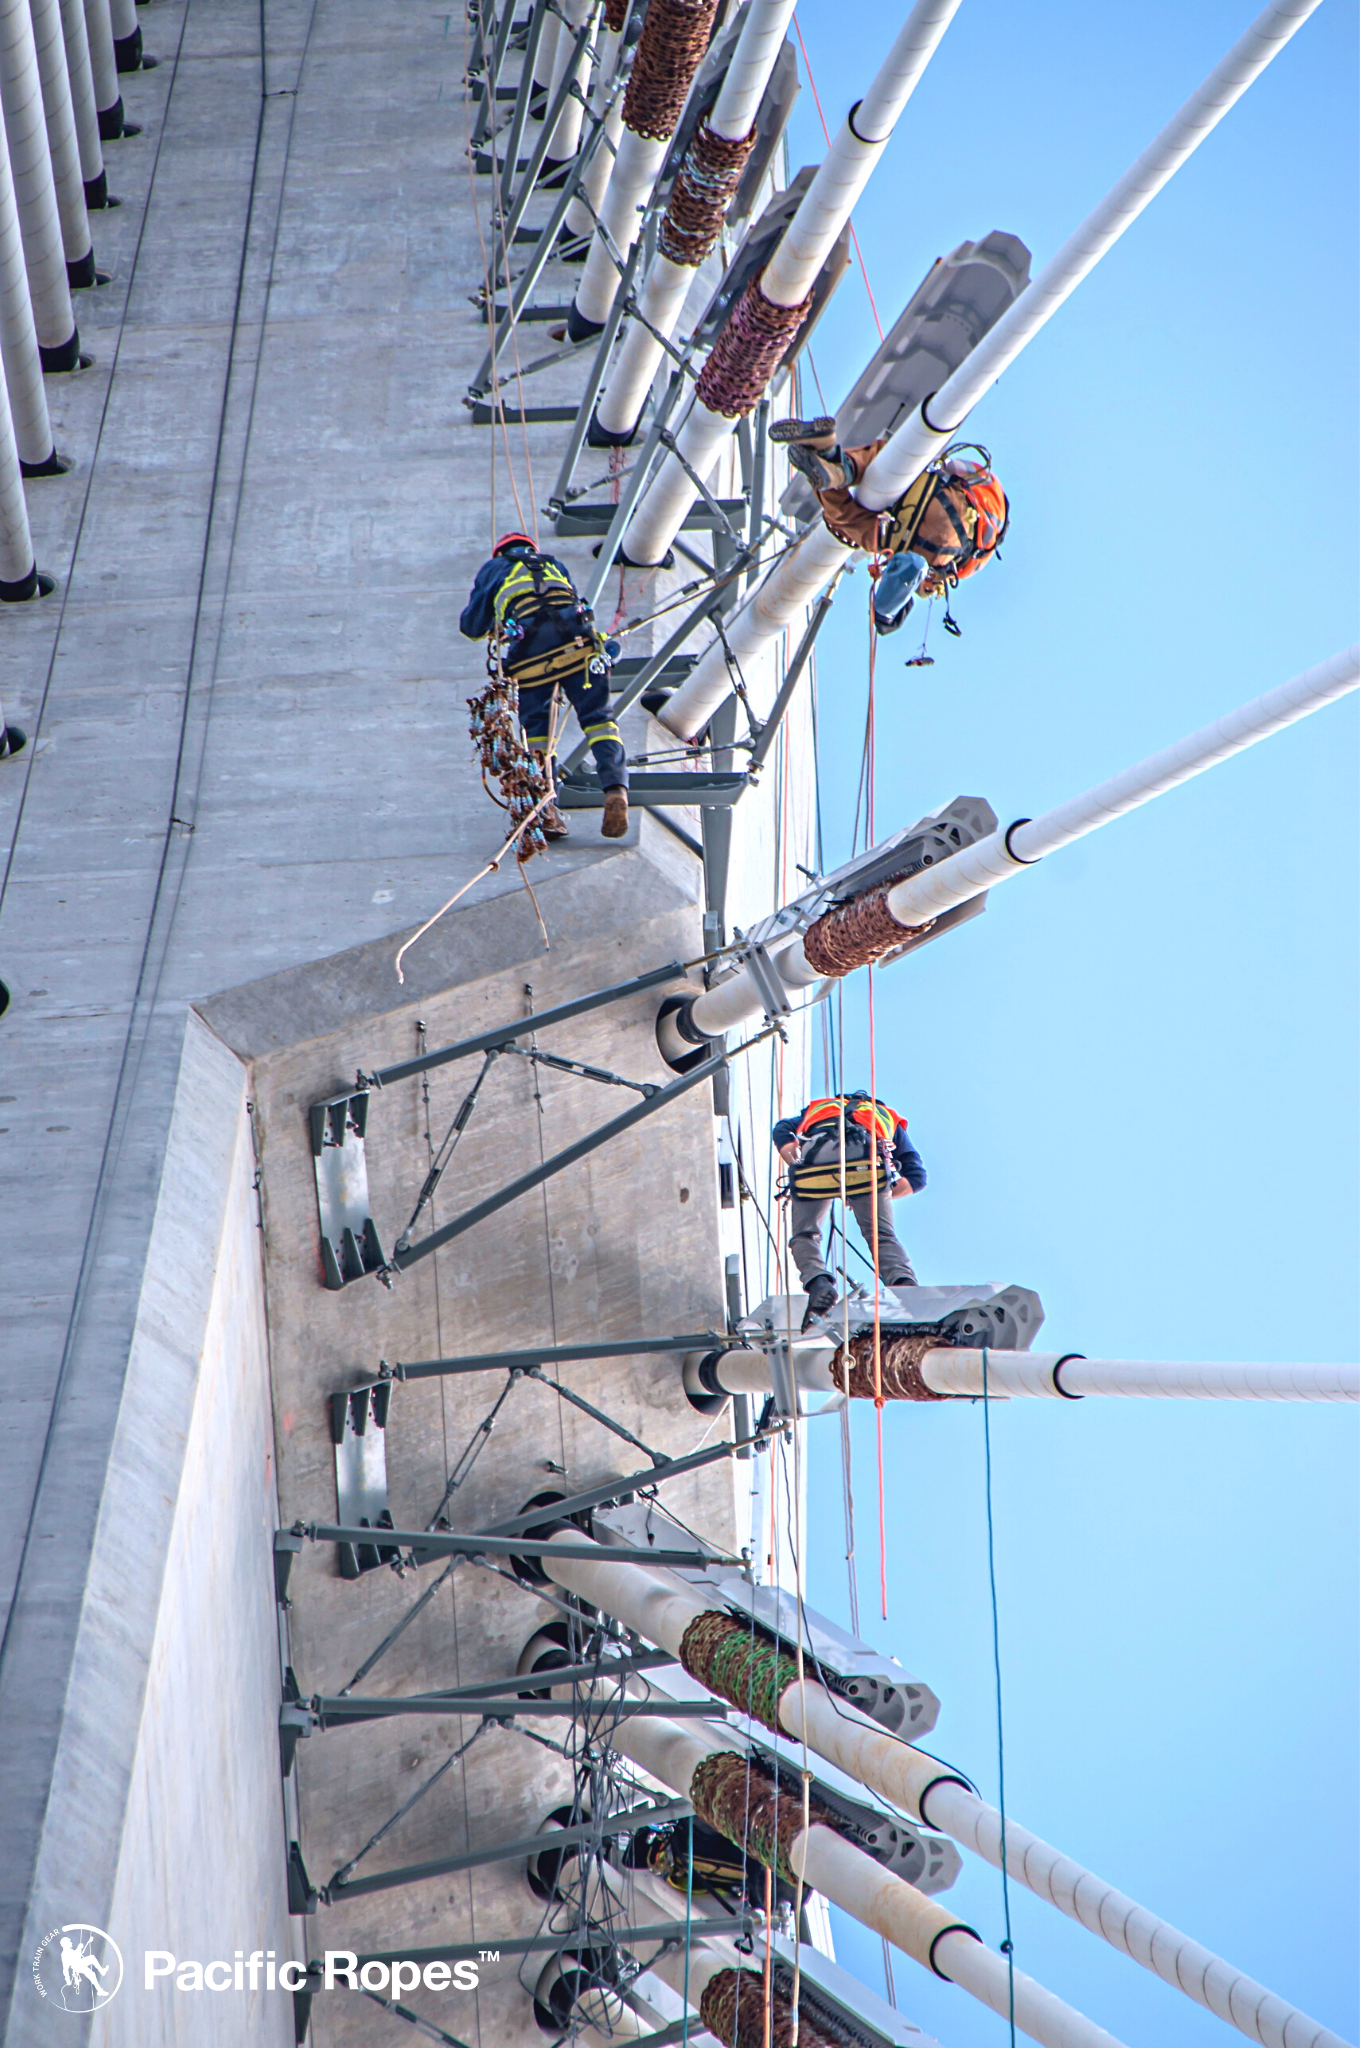 Lifting Heavy Materials with Rope Access